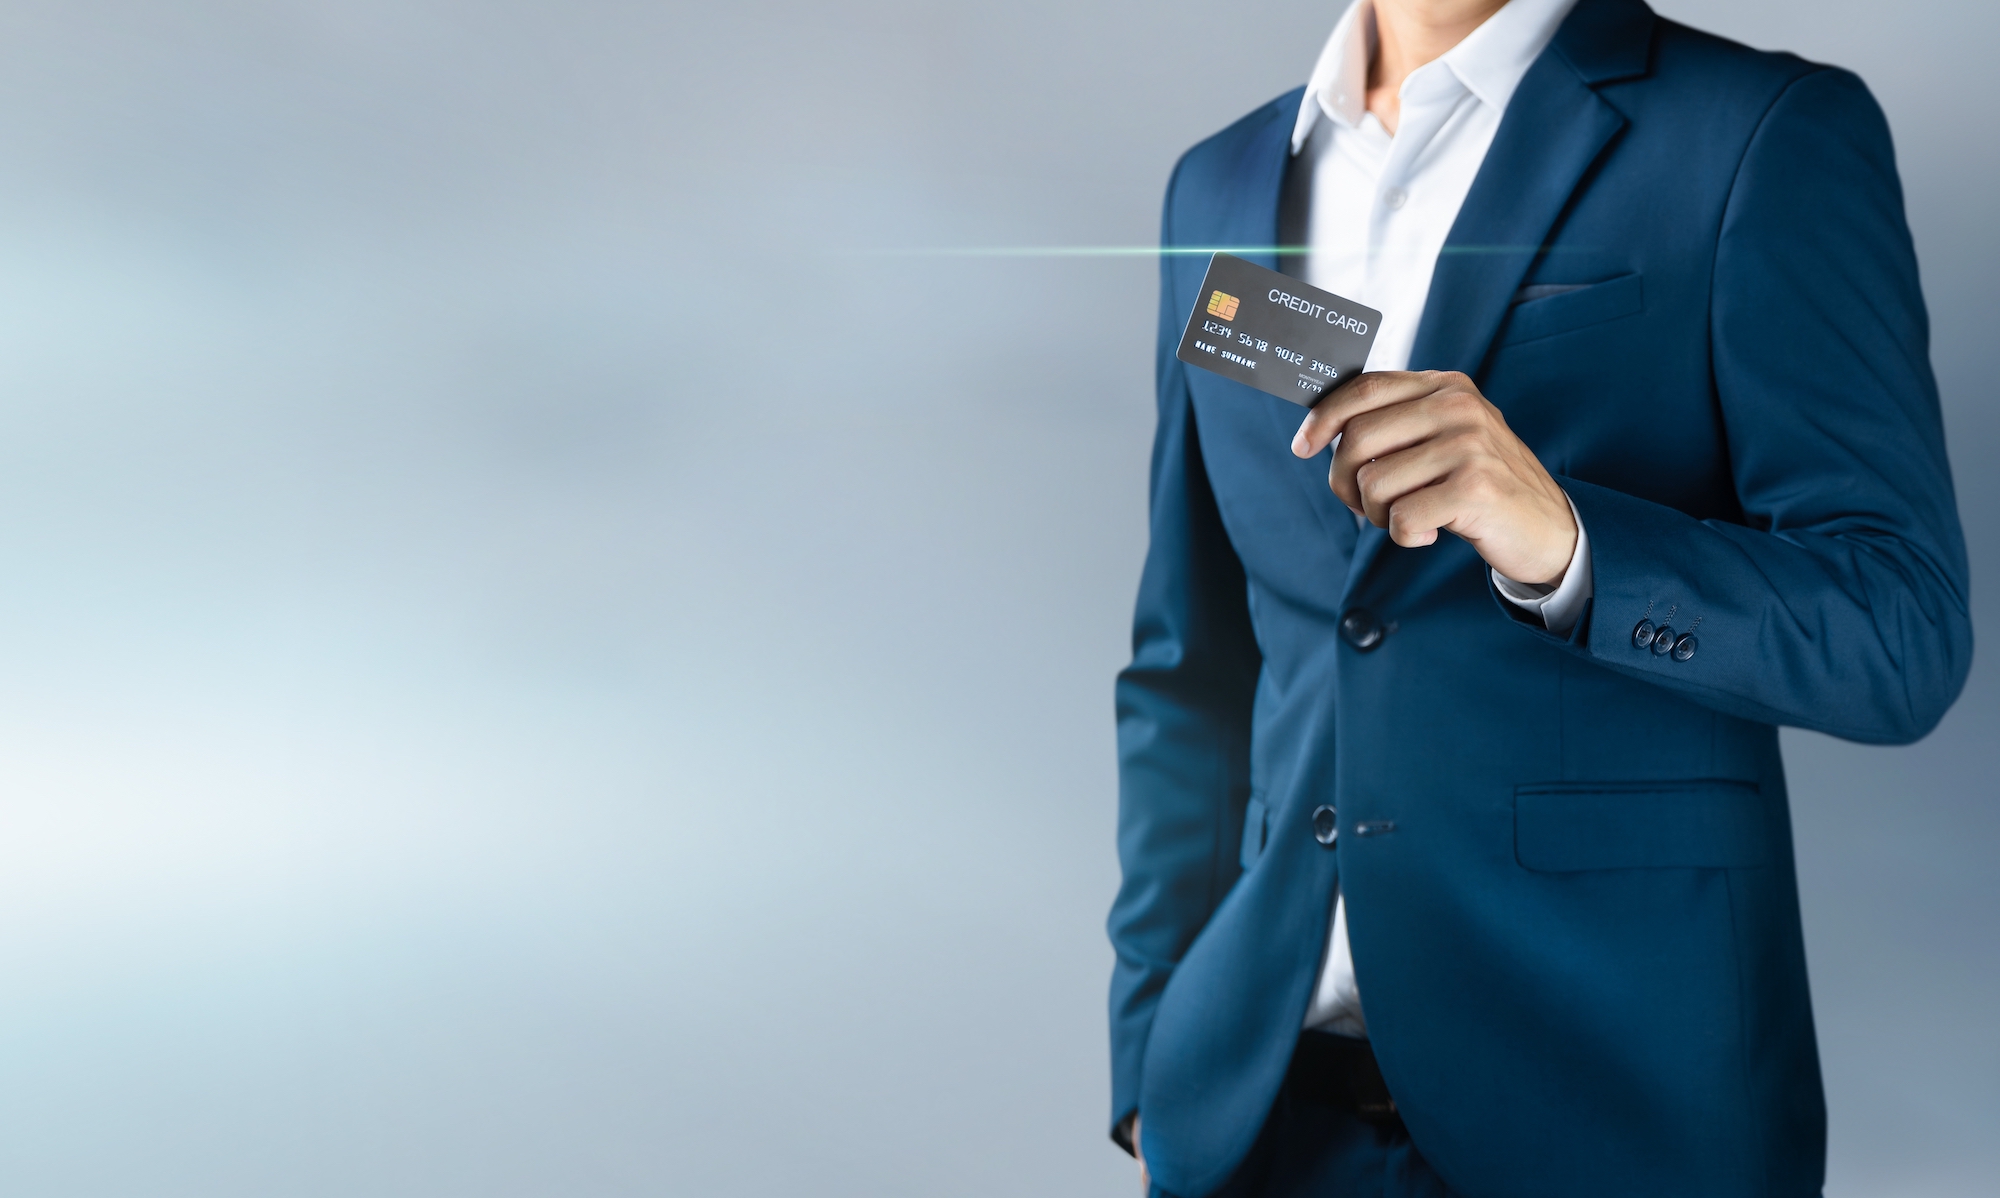 A businessman is pictured holding up a credit card.